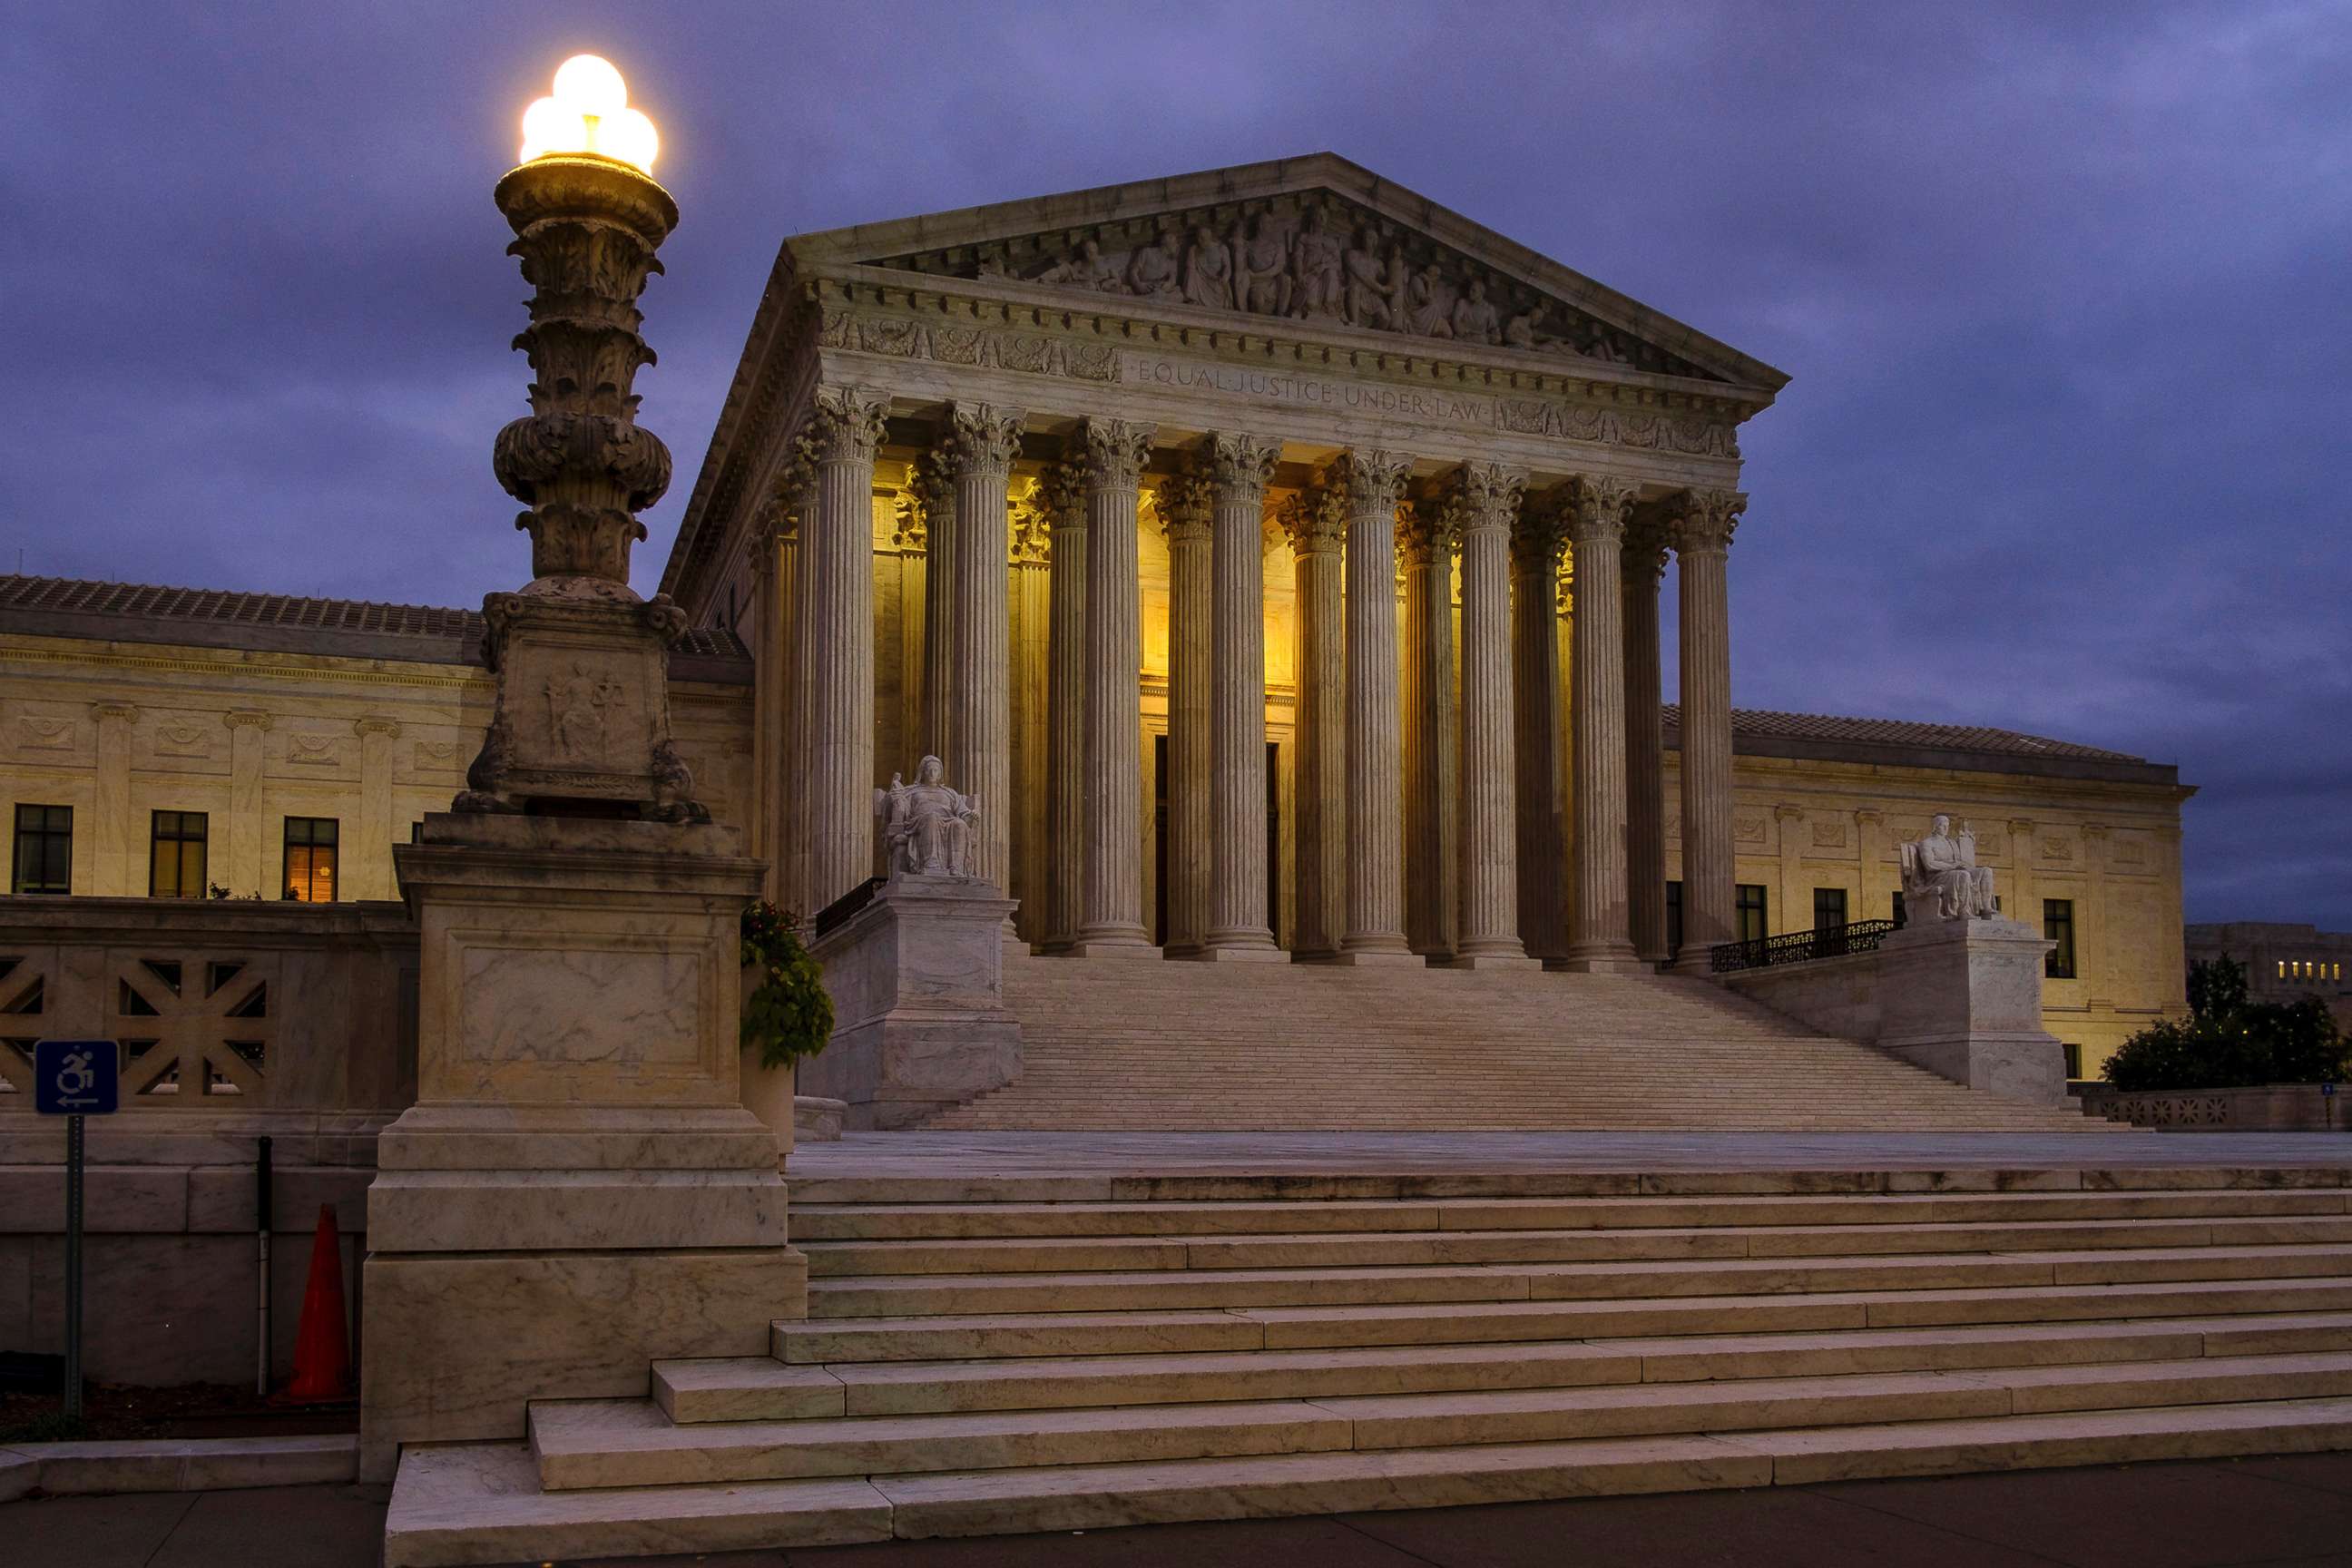 PHOTO: The U.S. Supreme Court building stands before dawn in Washington, D.C., Oct. 5, 2018.